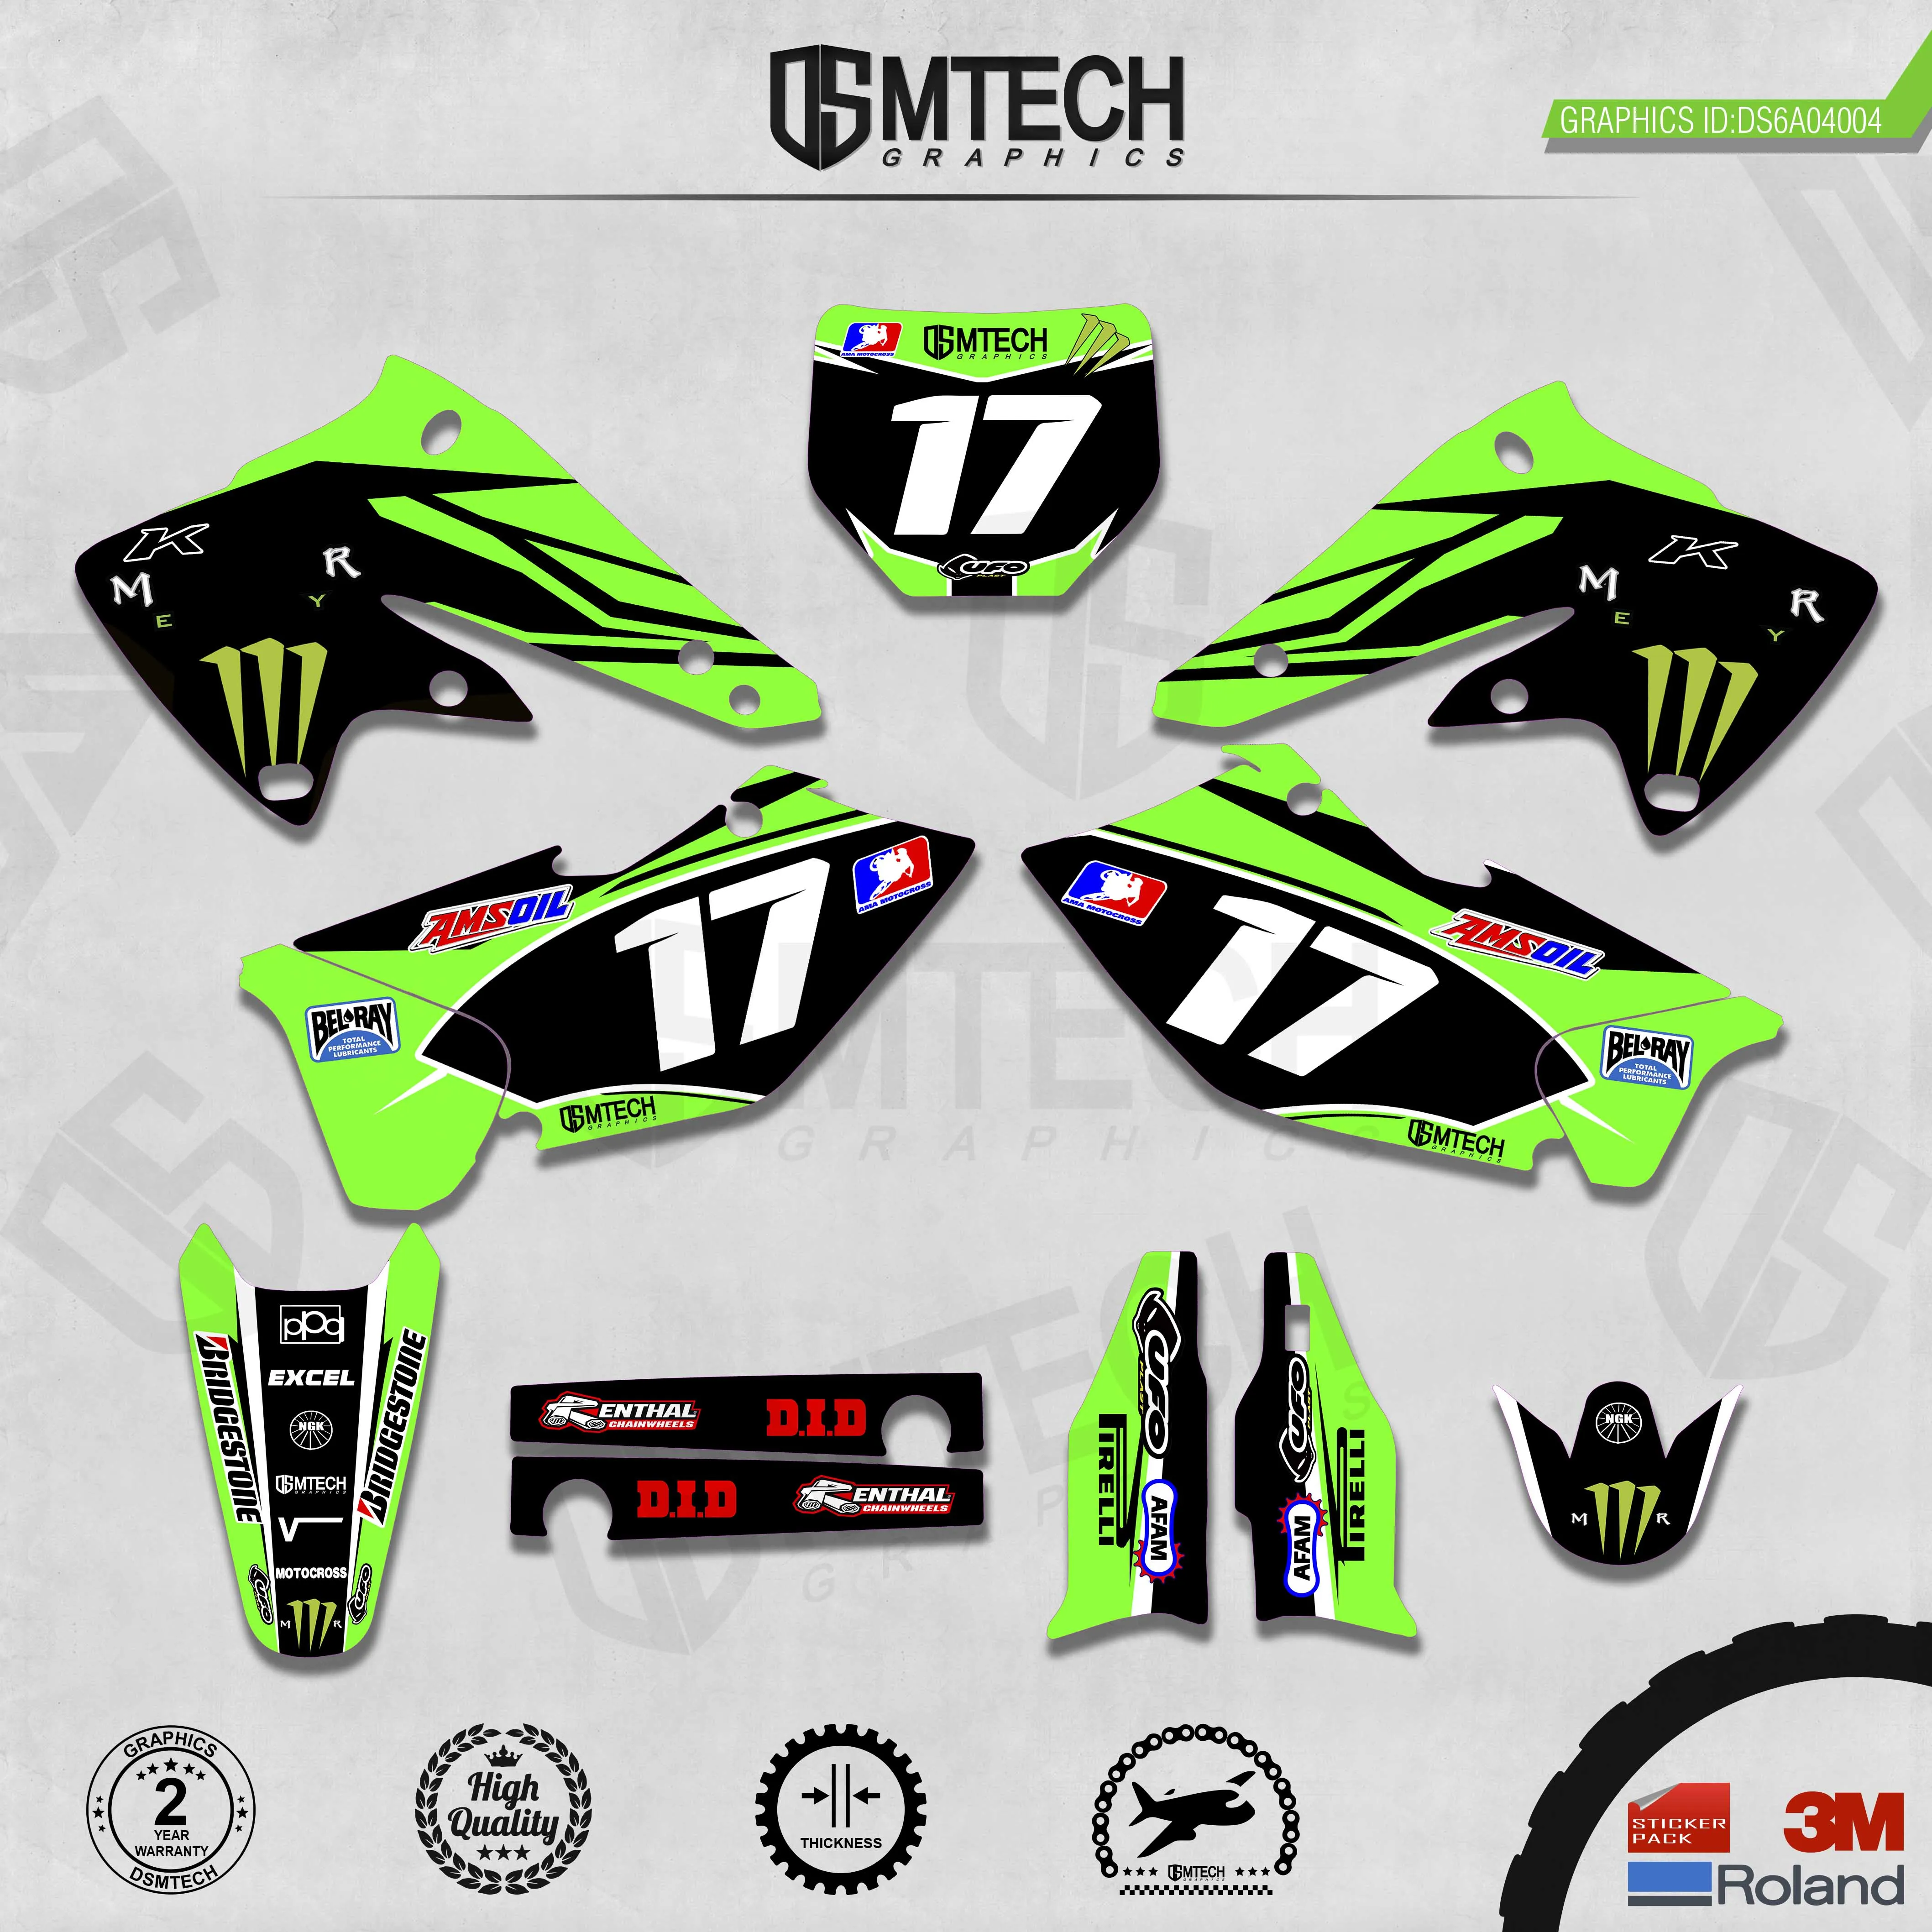 DSMTECH Customized Team Graphics Backgrounds Decals 3M Custom Stickers For KAWASAKI  2004 2005 KXF250  004